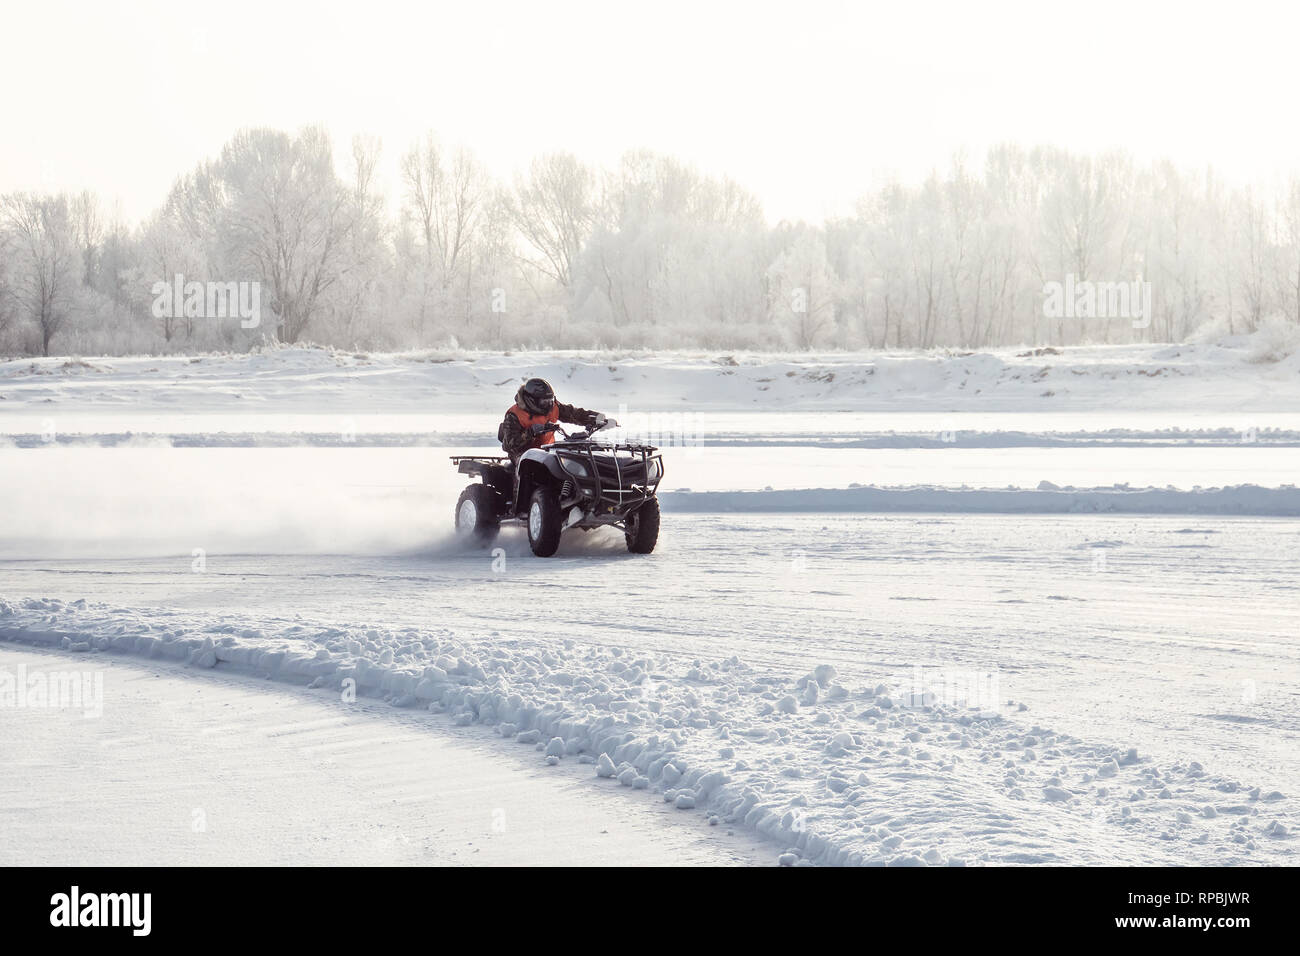 extreme winter motocross. The driver of the ATV skidded on the turn on a steep road. The ATV rider rides on the frozen ice on the lake Stock Photo